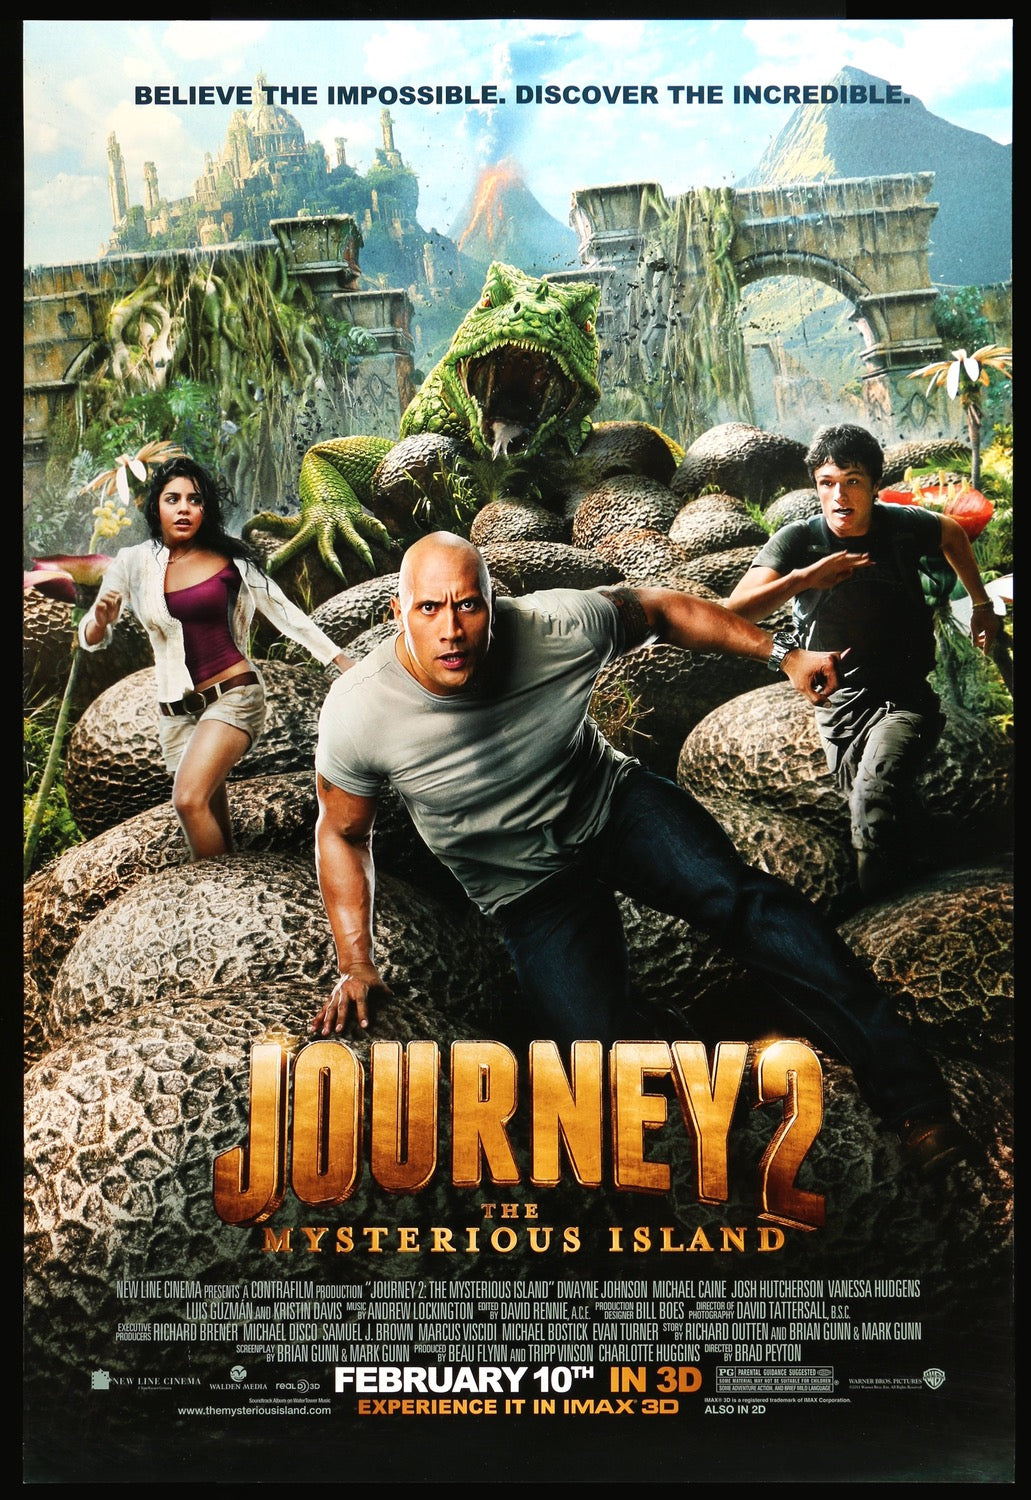 Journey 2: The Mysterious Island (2012) original movie poster for sale at Original Film Art